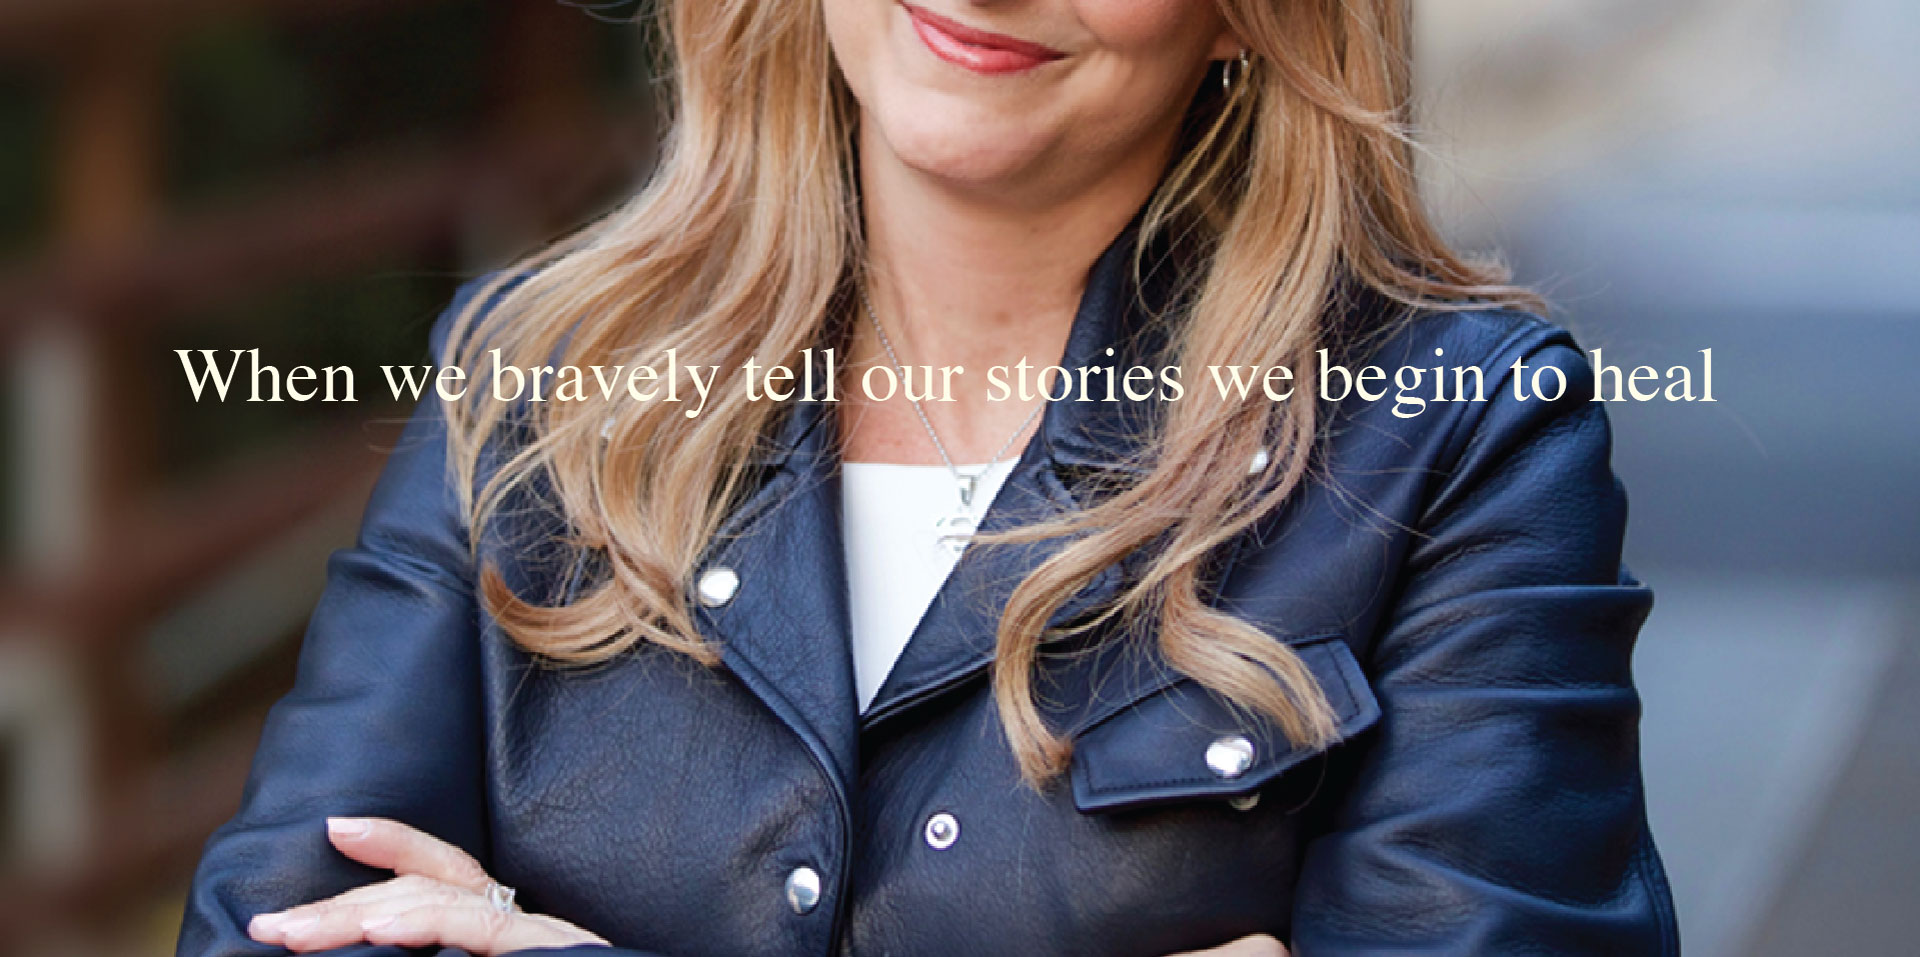 When we bravely tell our stories we begin to heal